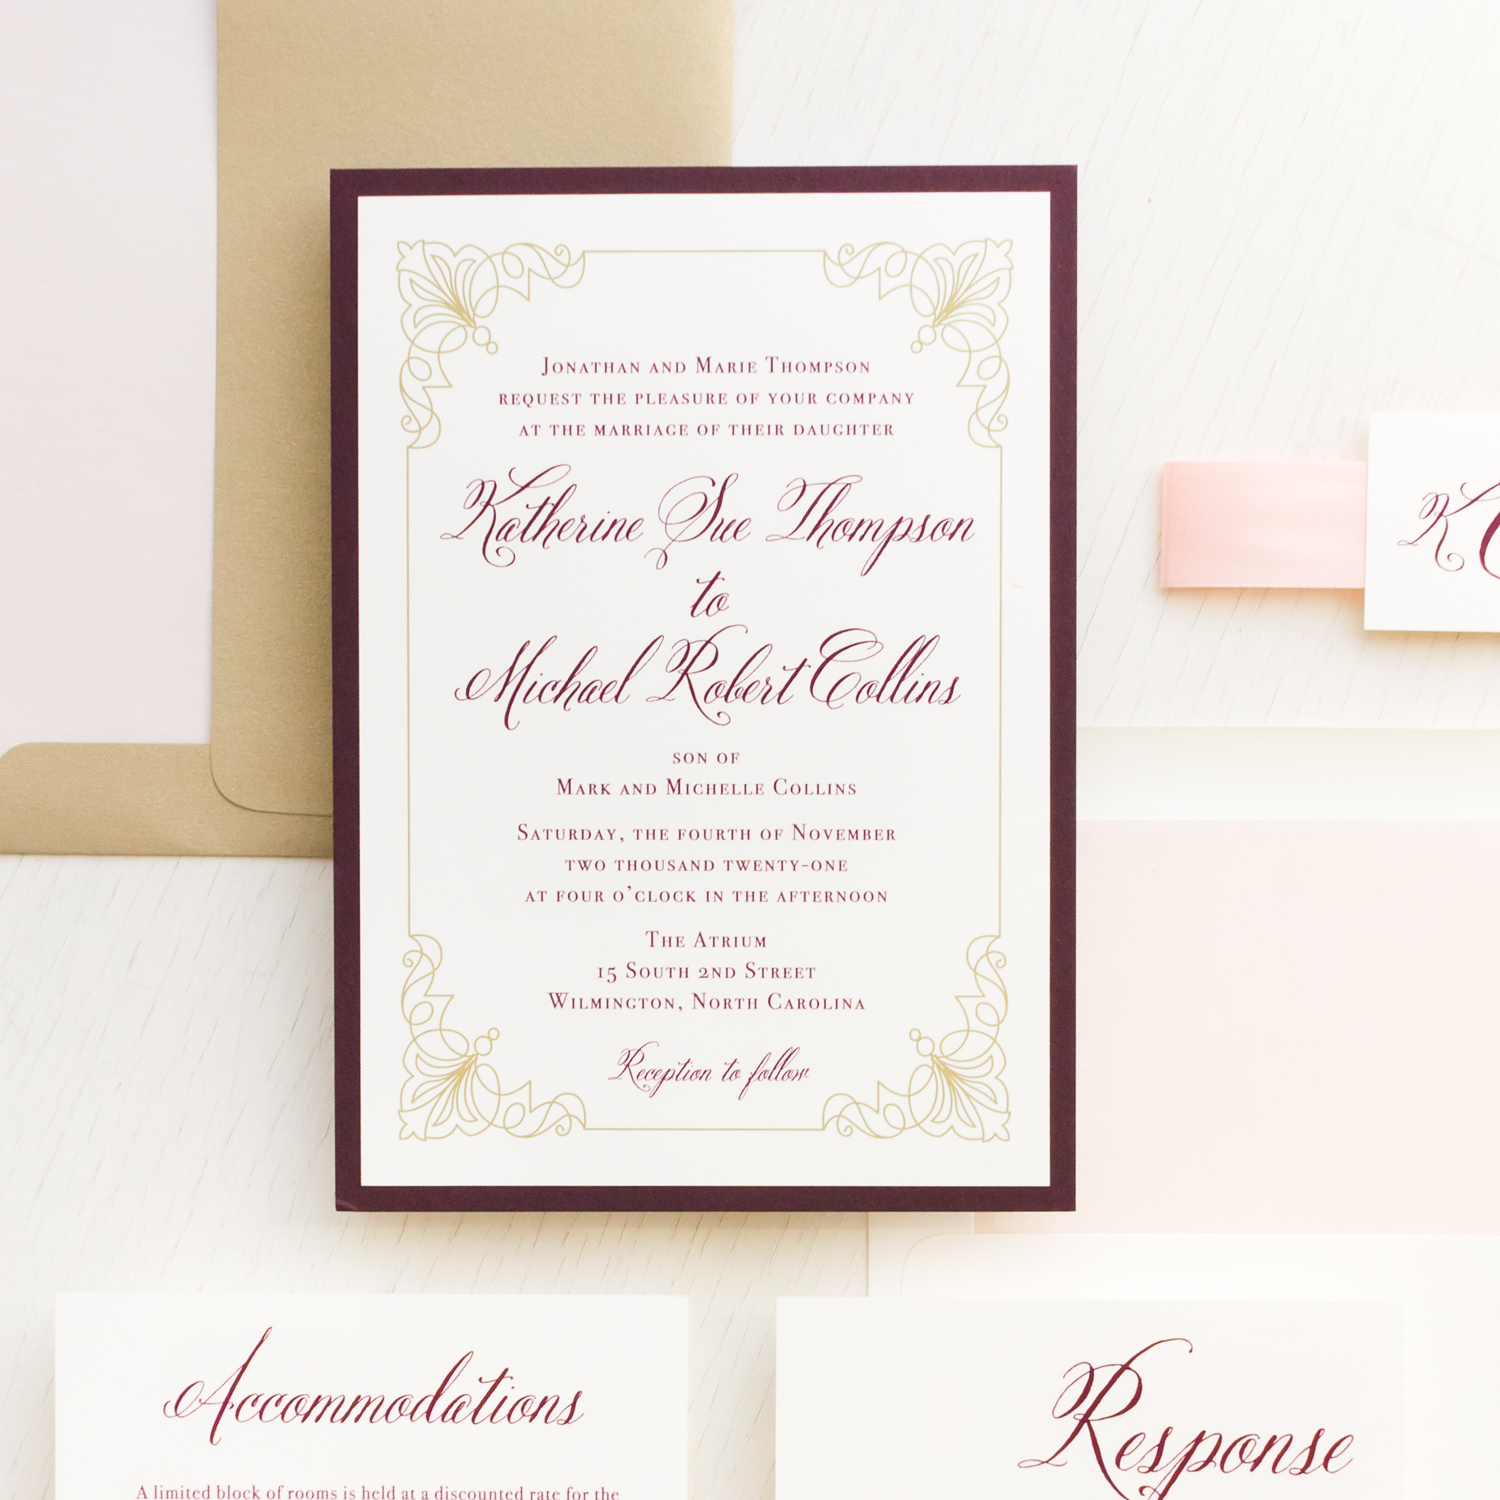 15 Wedding Stamp Ideas for Your Invitations